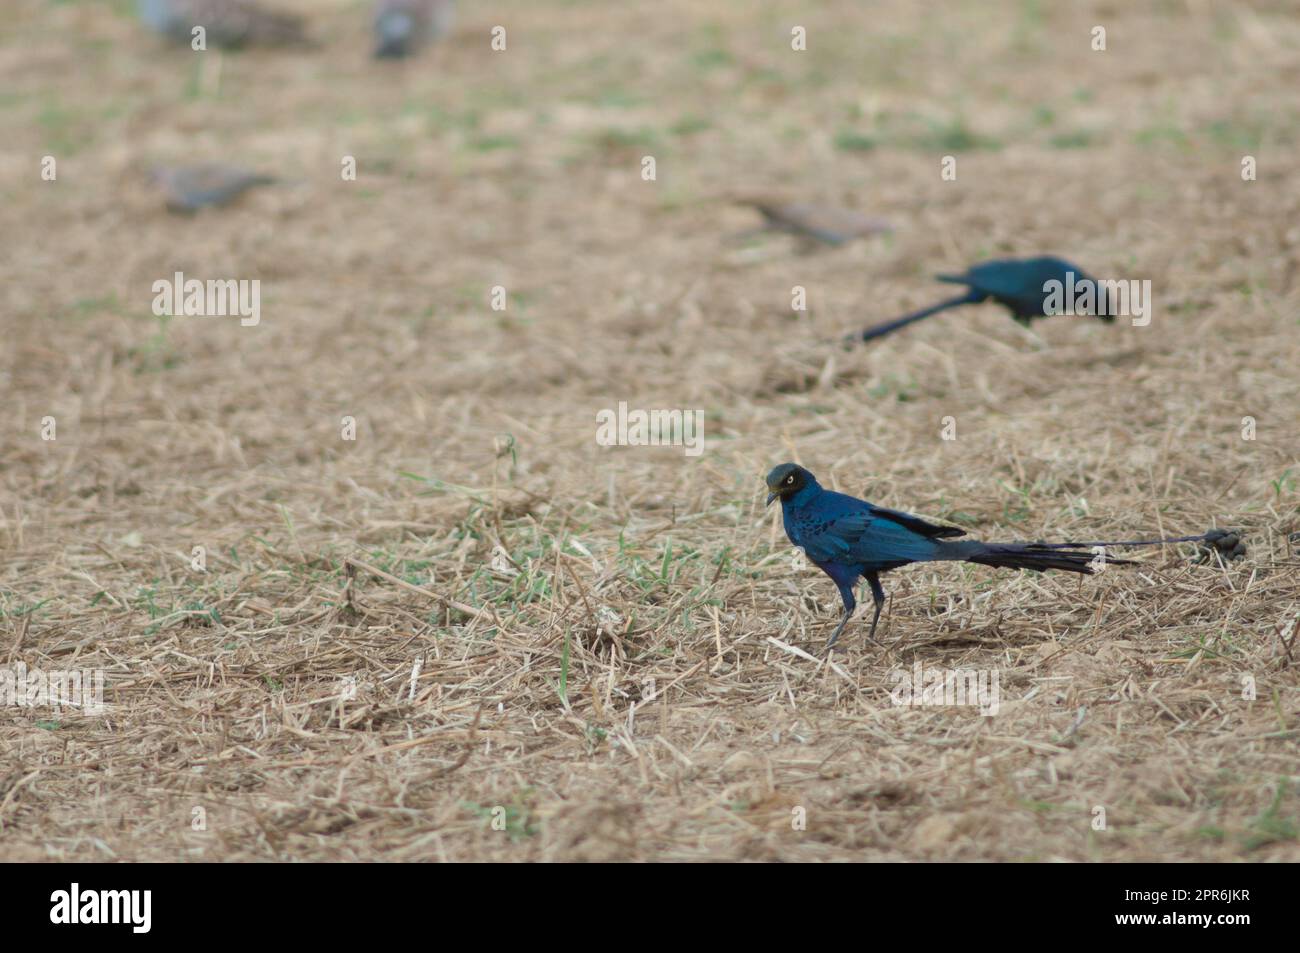 Long-tailed glossy starlings Lamprotornis caudatus in a meadow. Stock Photo